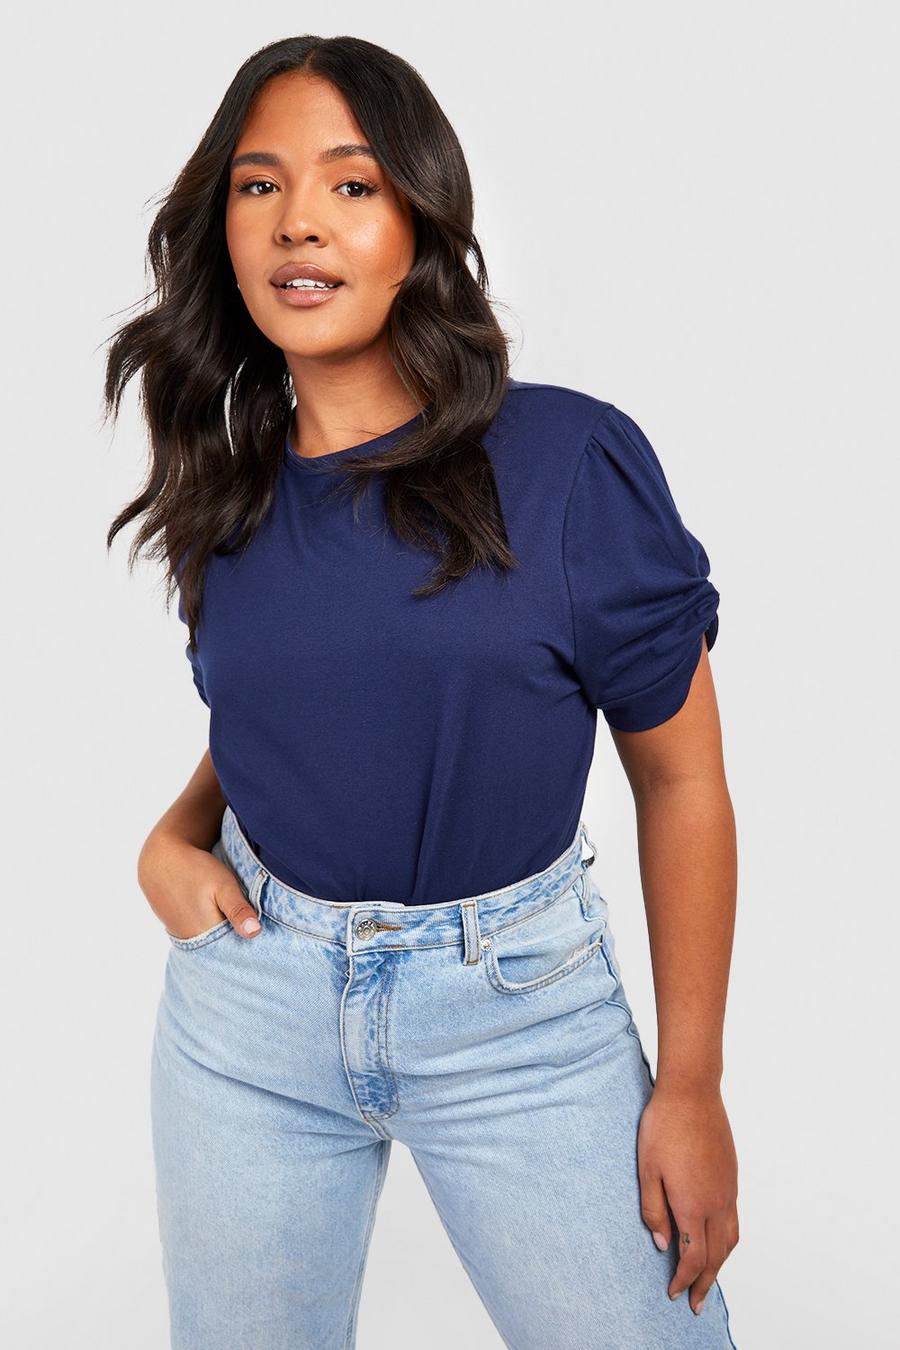 T-shirt Plus Size con ruches, nodo e maniche a sbuffo, Navy image number 1